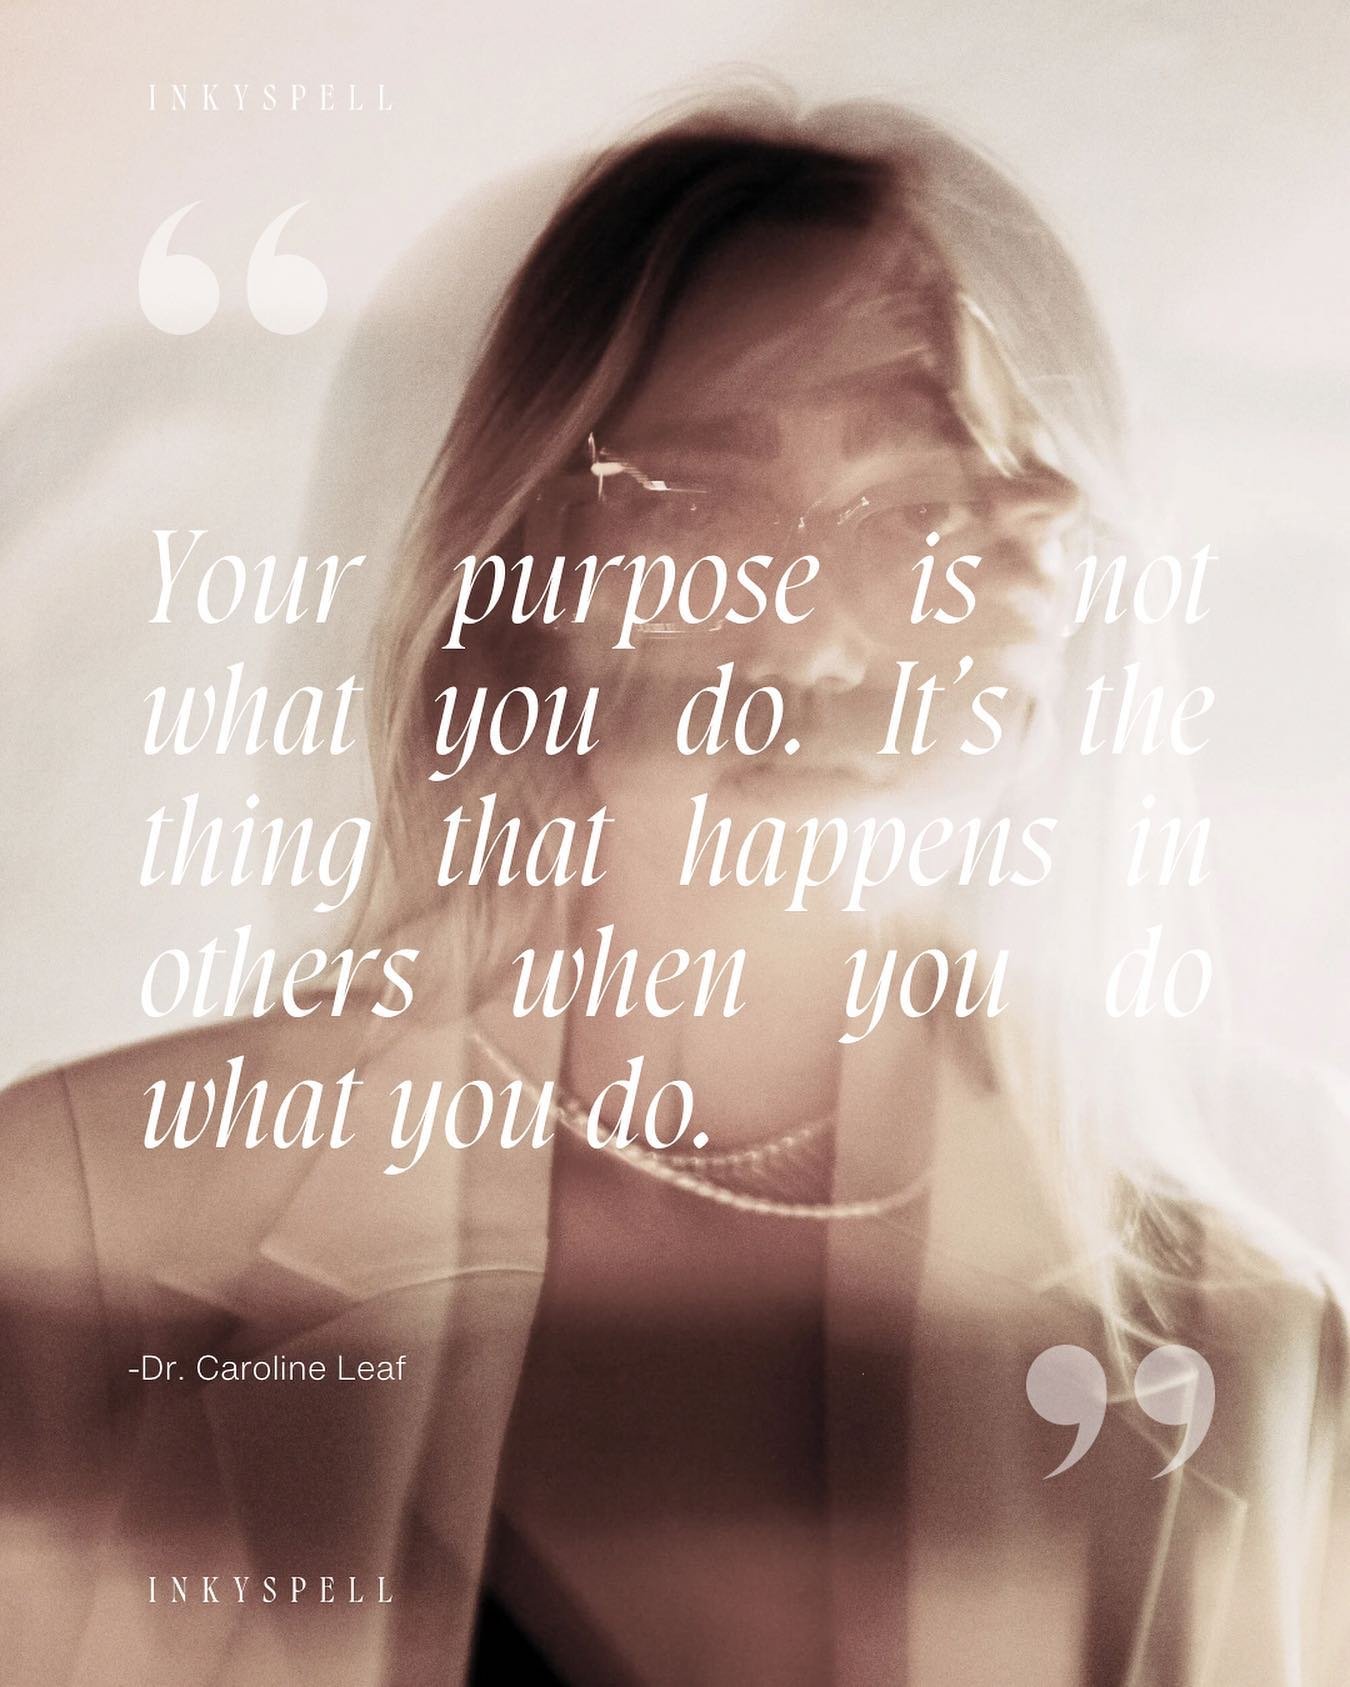 ~ LIFT ~ &ldquo;Your purpose is not what you do. It&rsquo;s the thing that happens in others when you do what you do.&rdquo;

-Dr Caroline Leaf

My purpose in the space of InkySpell is guiding my clients through a process of visual transformation as 